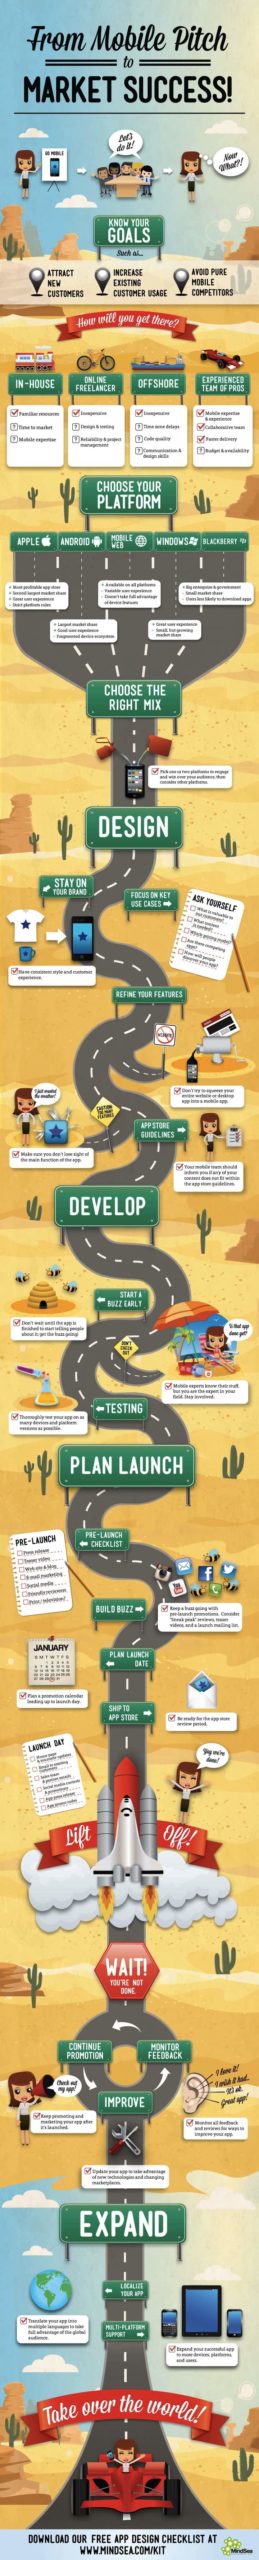 Mobile App Planning Infographic